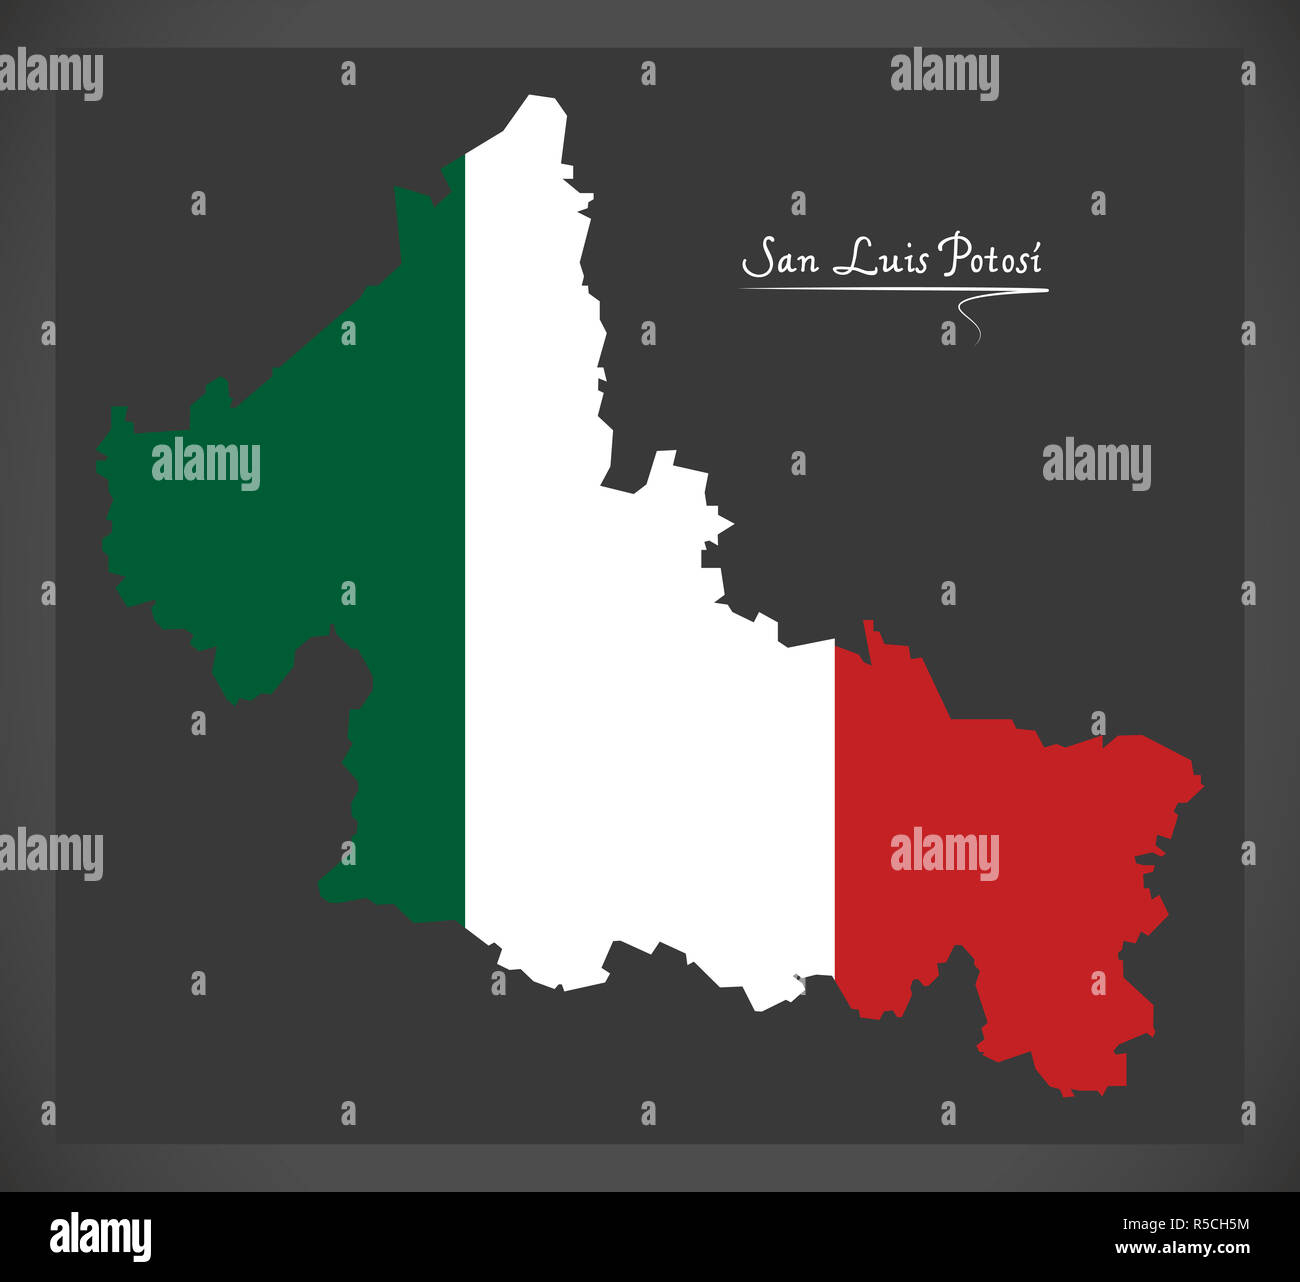 San Luis Potosi map with Mexican national flag illustration Stock Photo